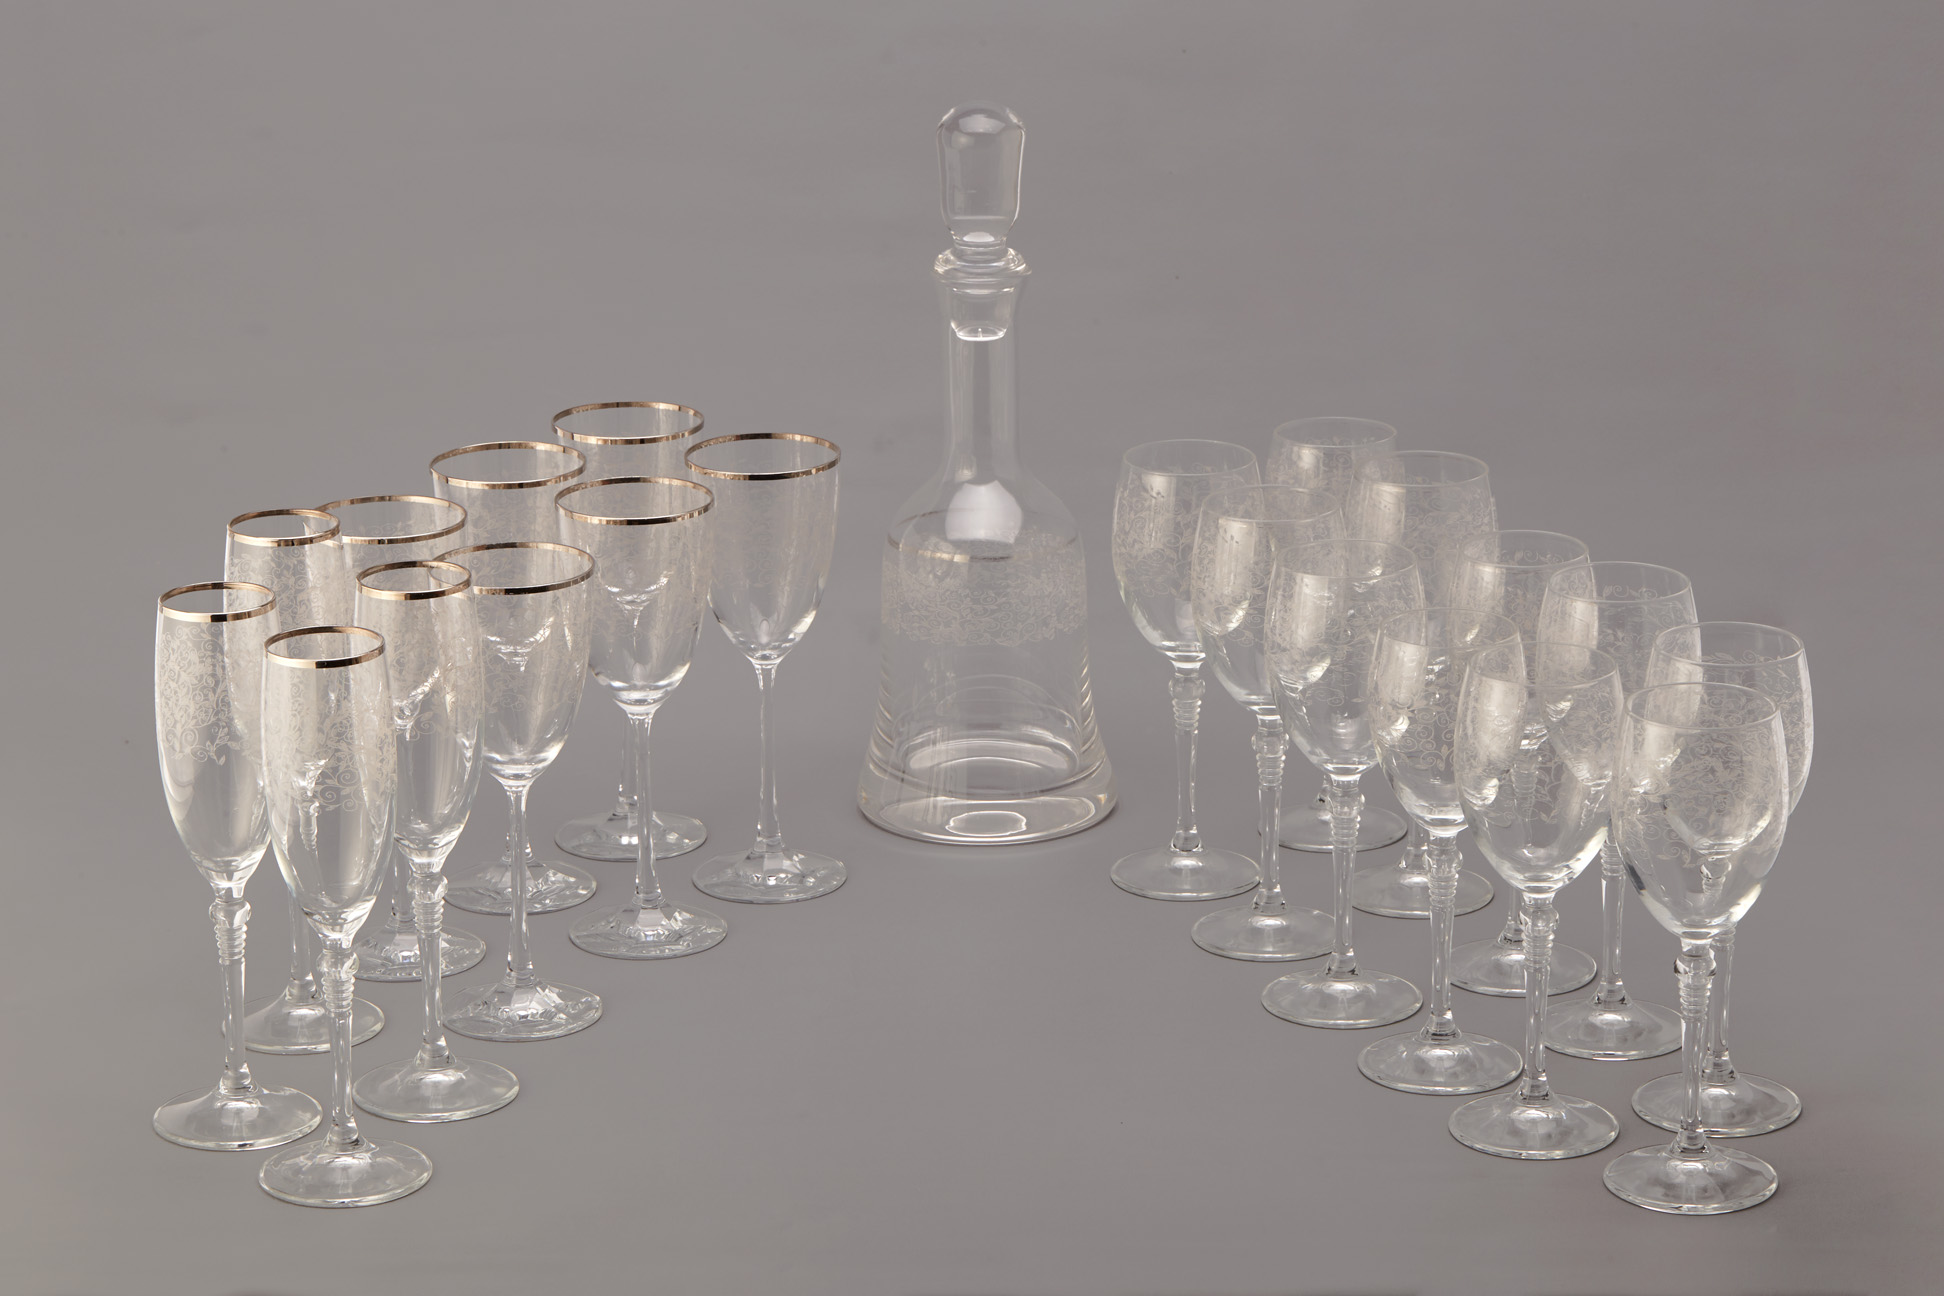 A PART SERVICE OF GLASSWARE WITH FOLIATE DECORATION